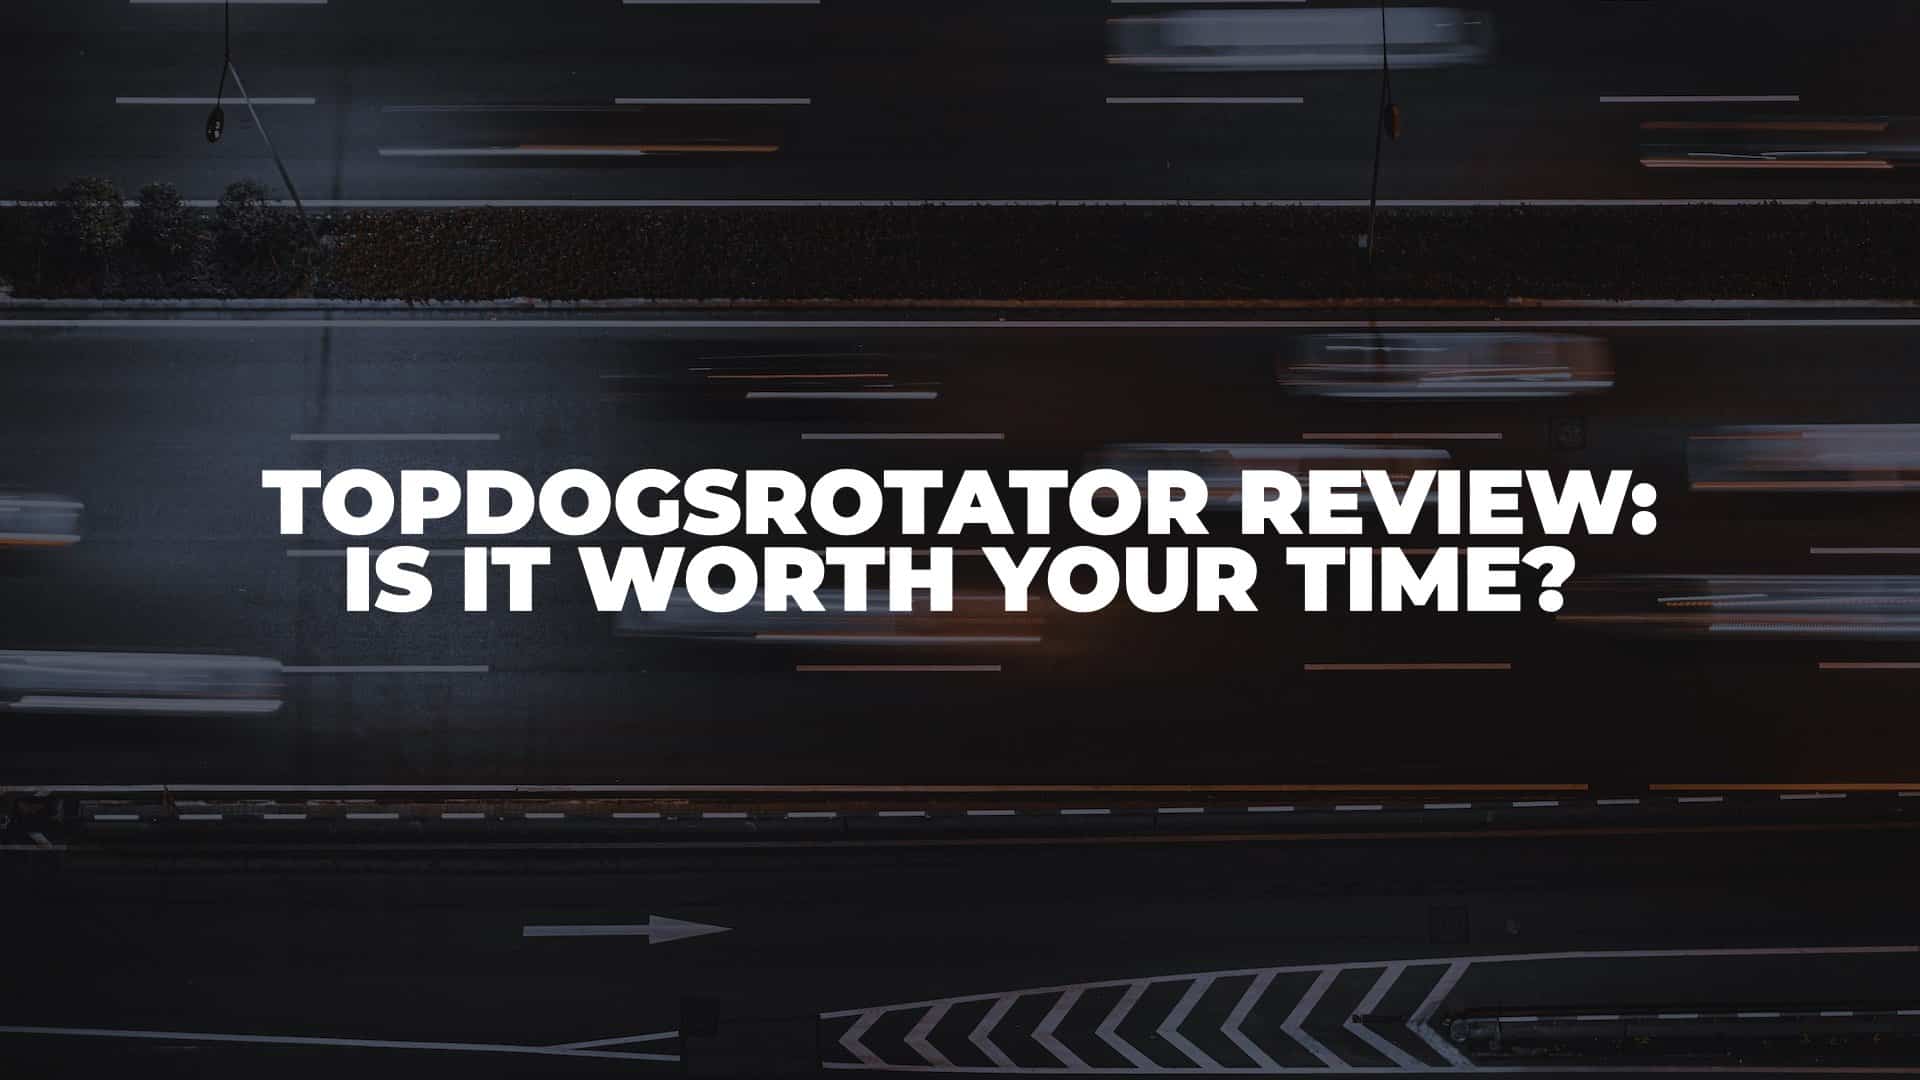 TopDogsRotator Review - Featured Image